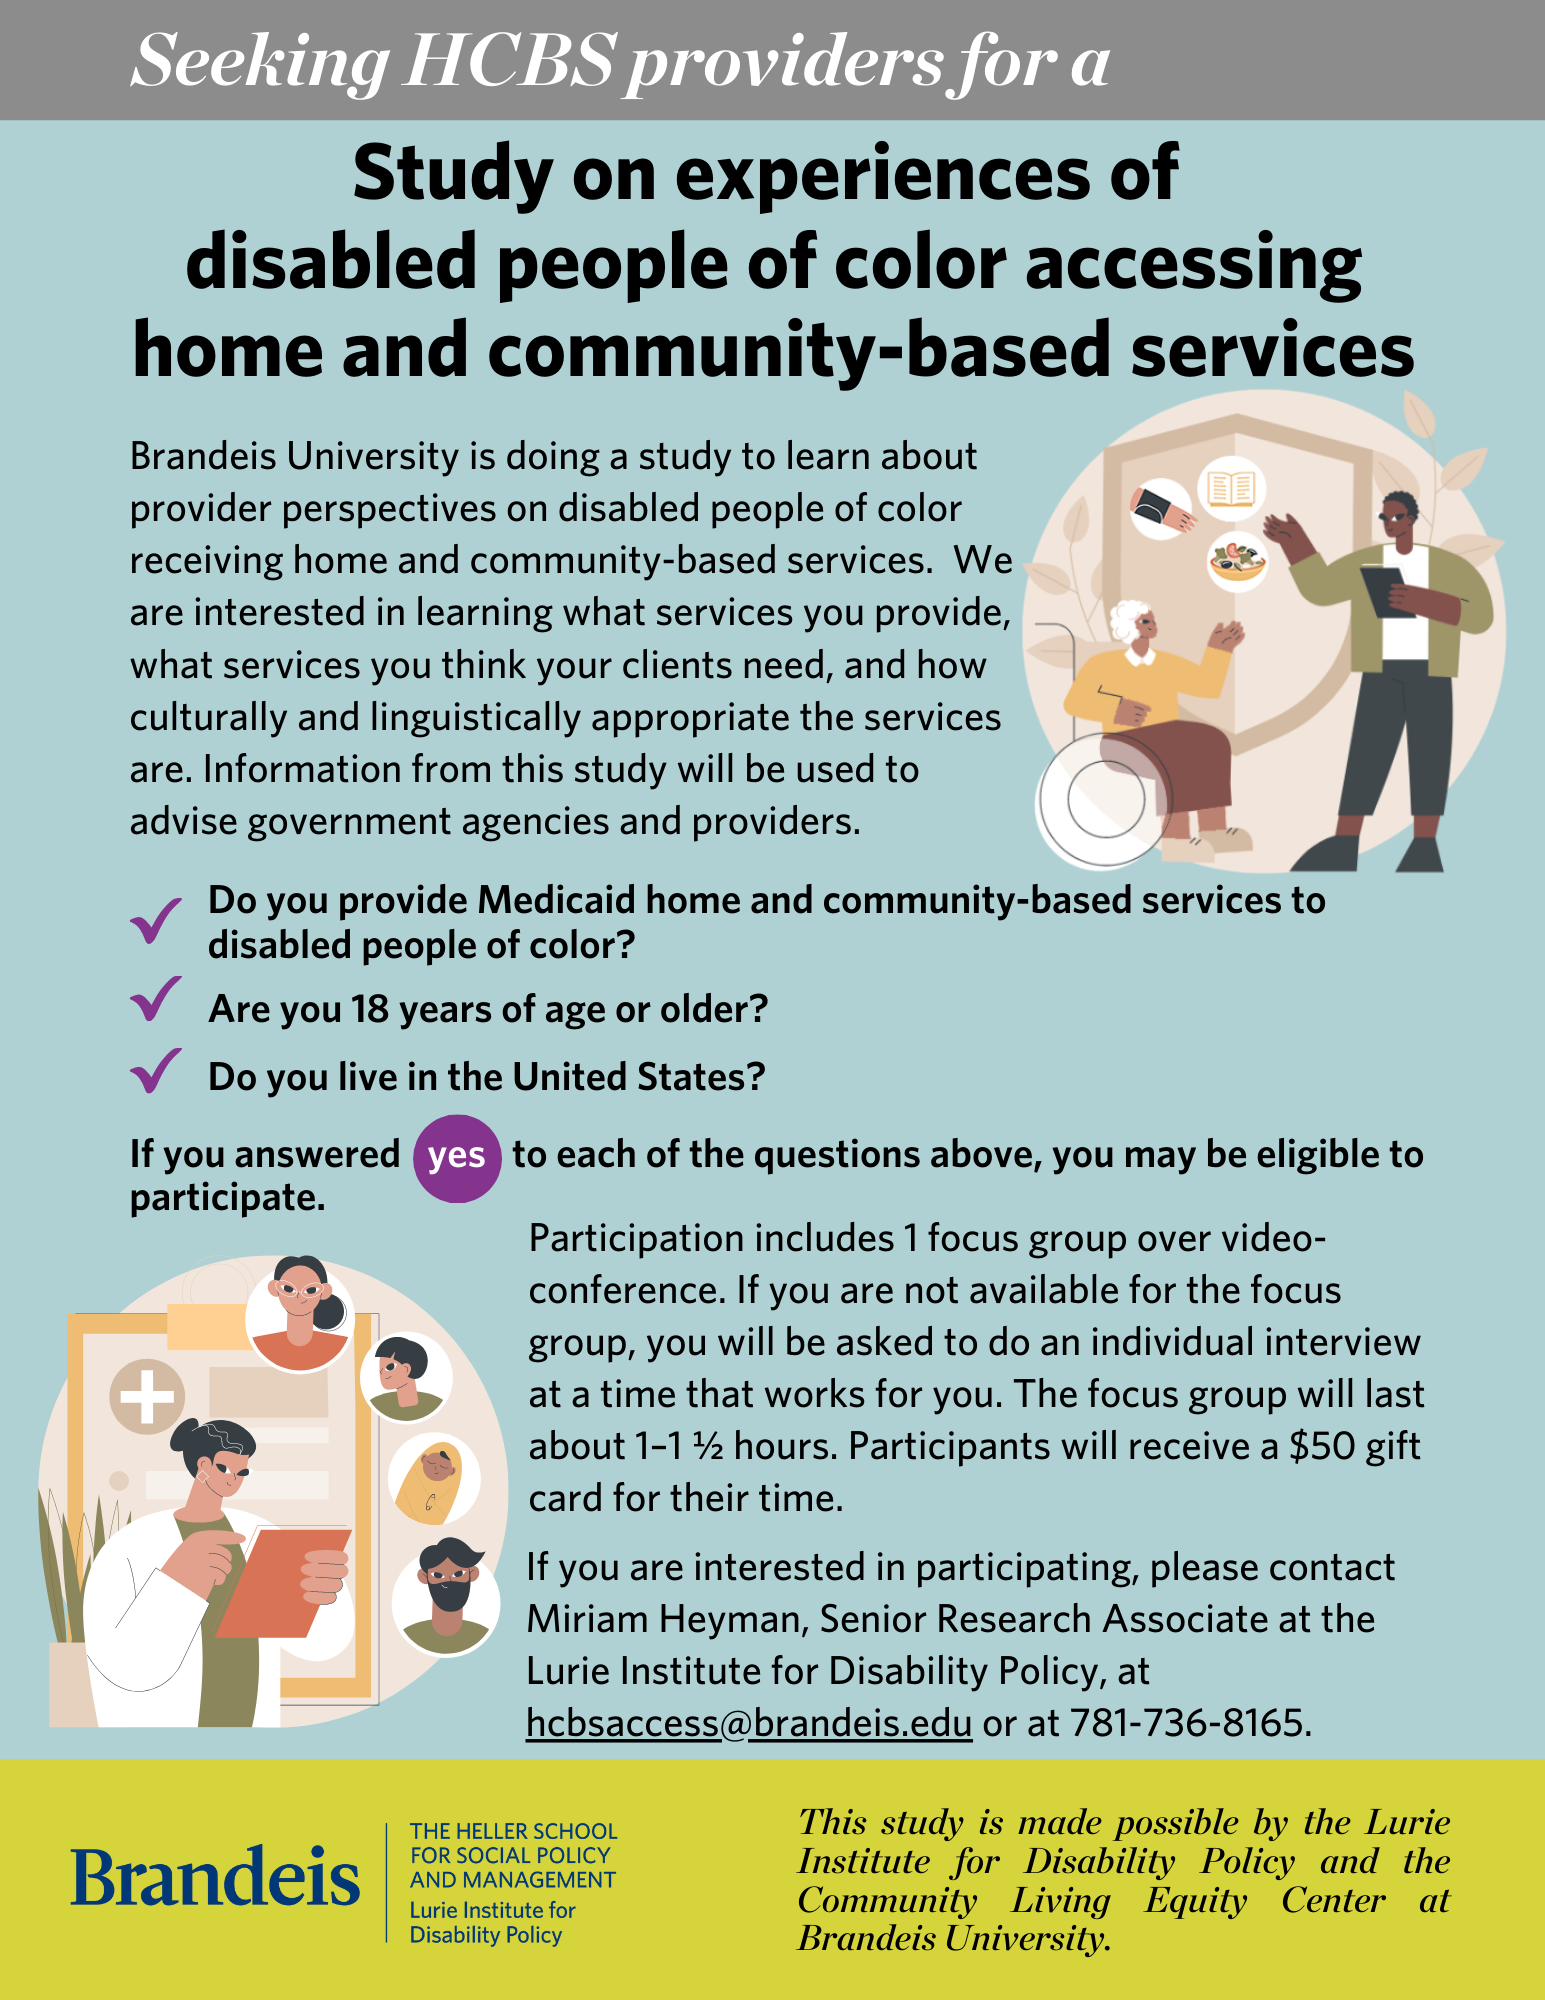 A Study of Experiences of Disabled People of Color Accessing Home and Community-Based Services (providers recruitment poster)